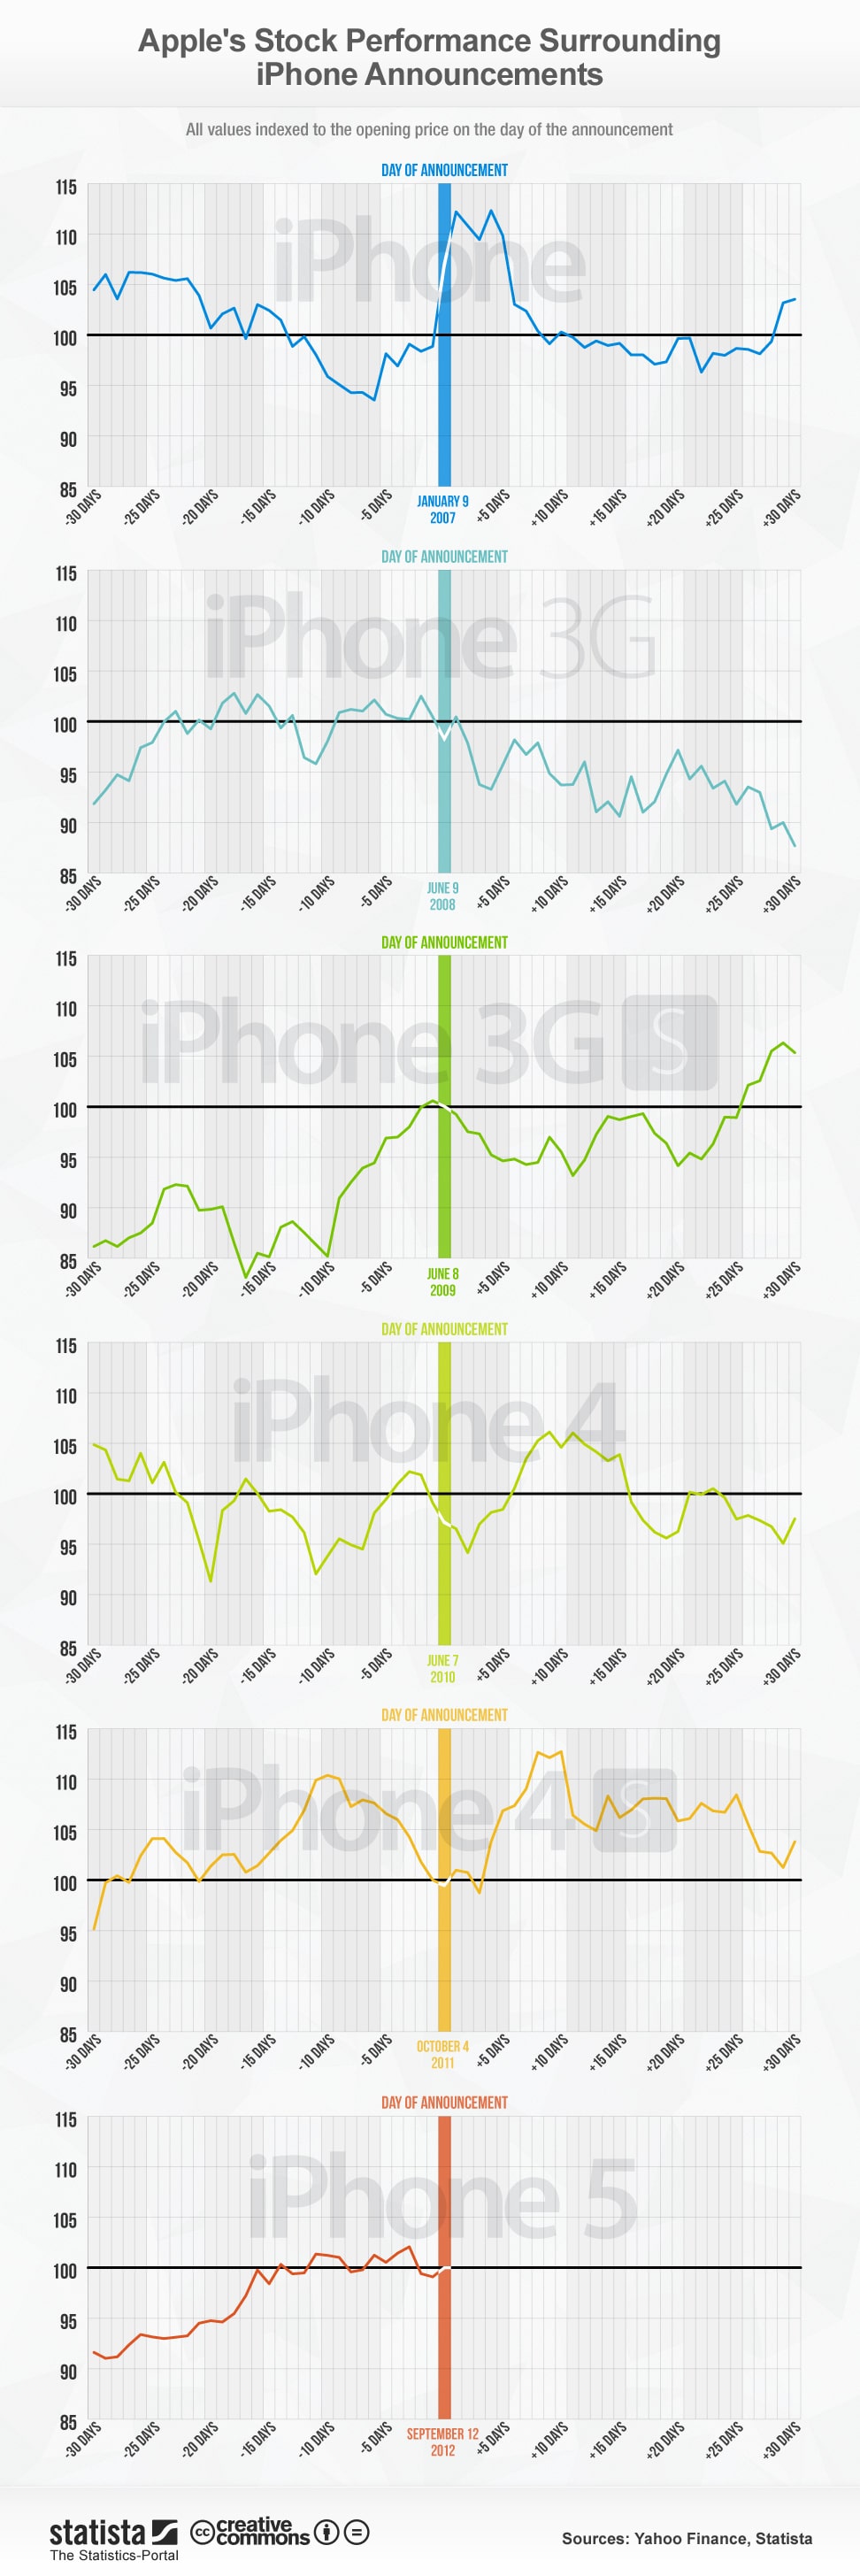 How Apple’s iPhone Announcements Affect The Stock [Infographic]